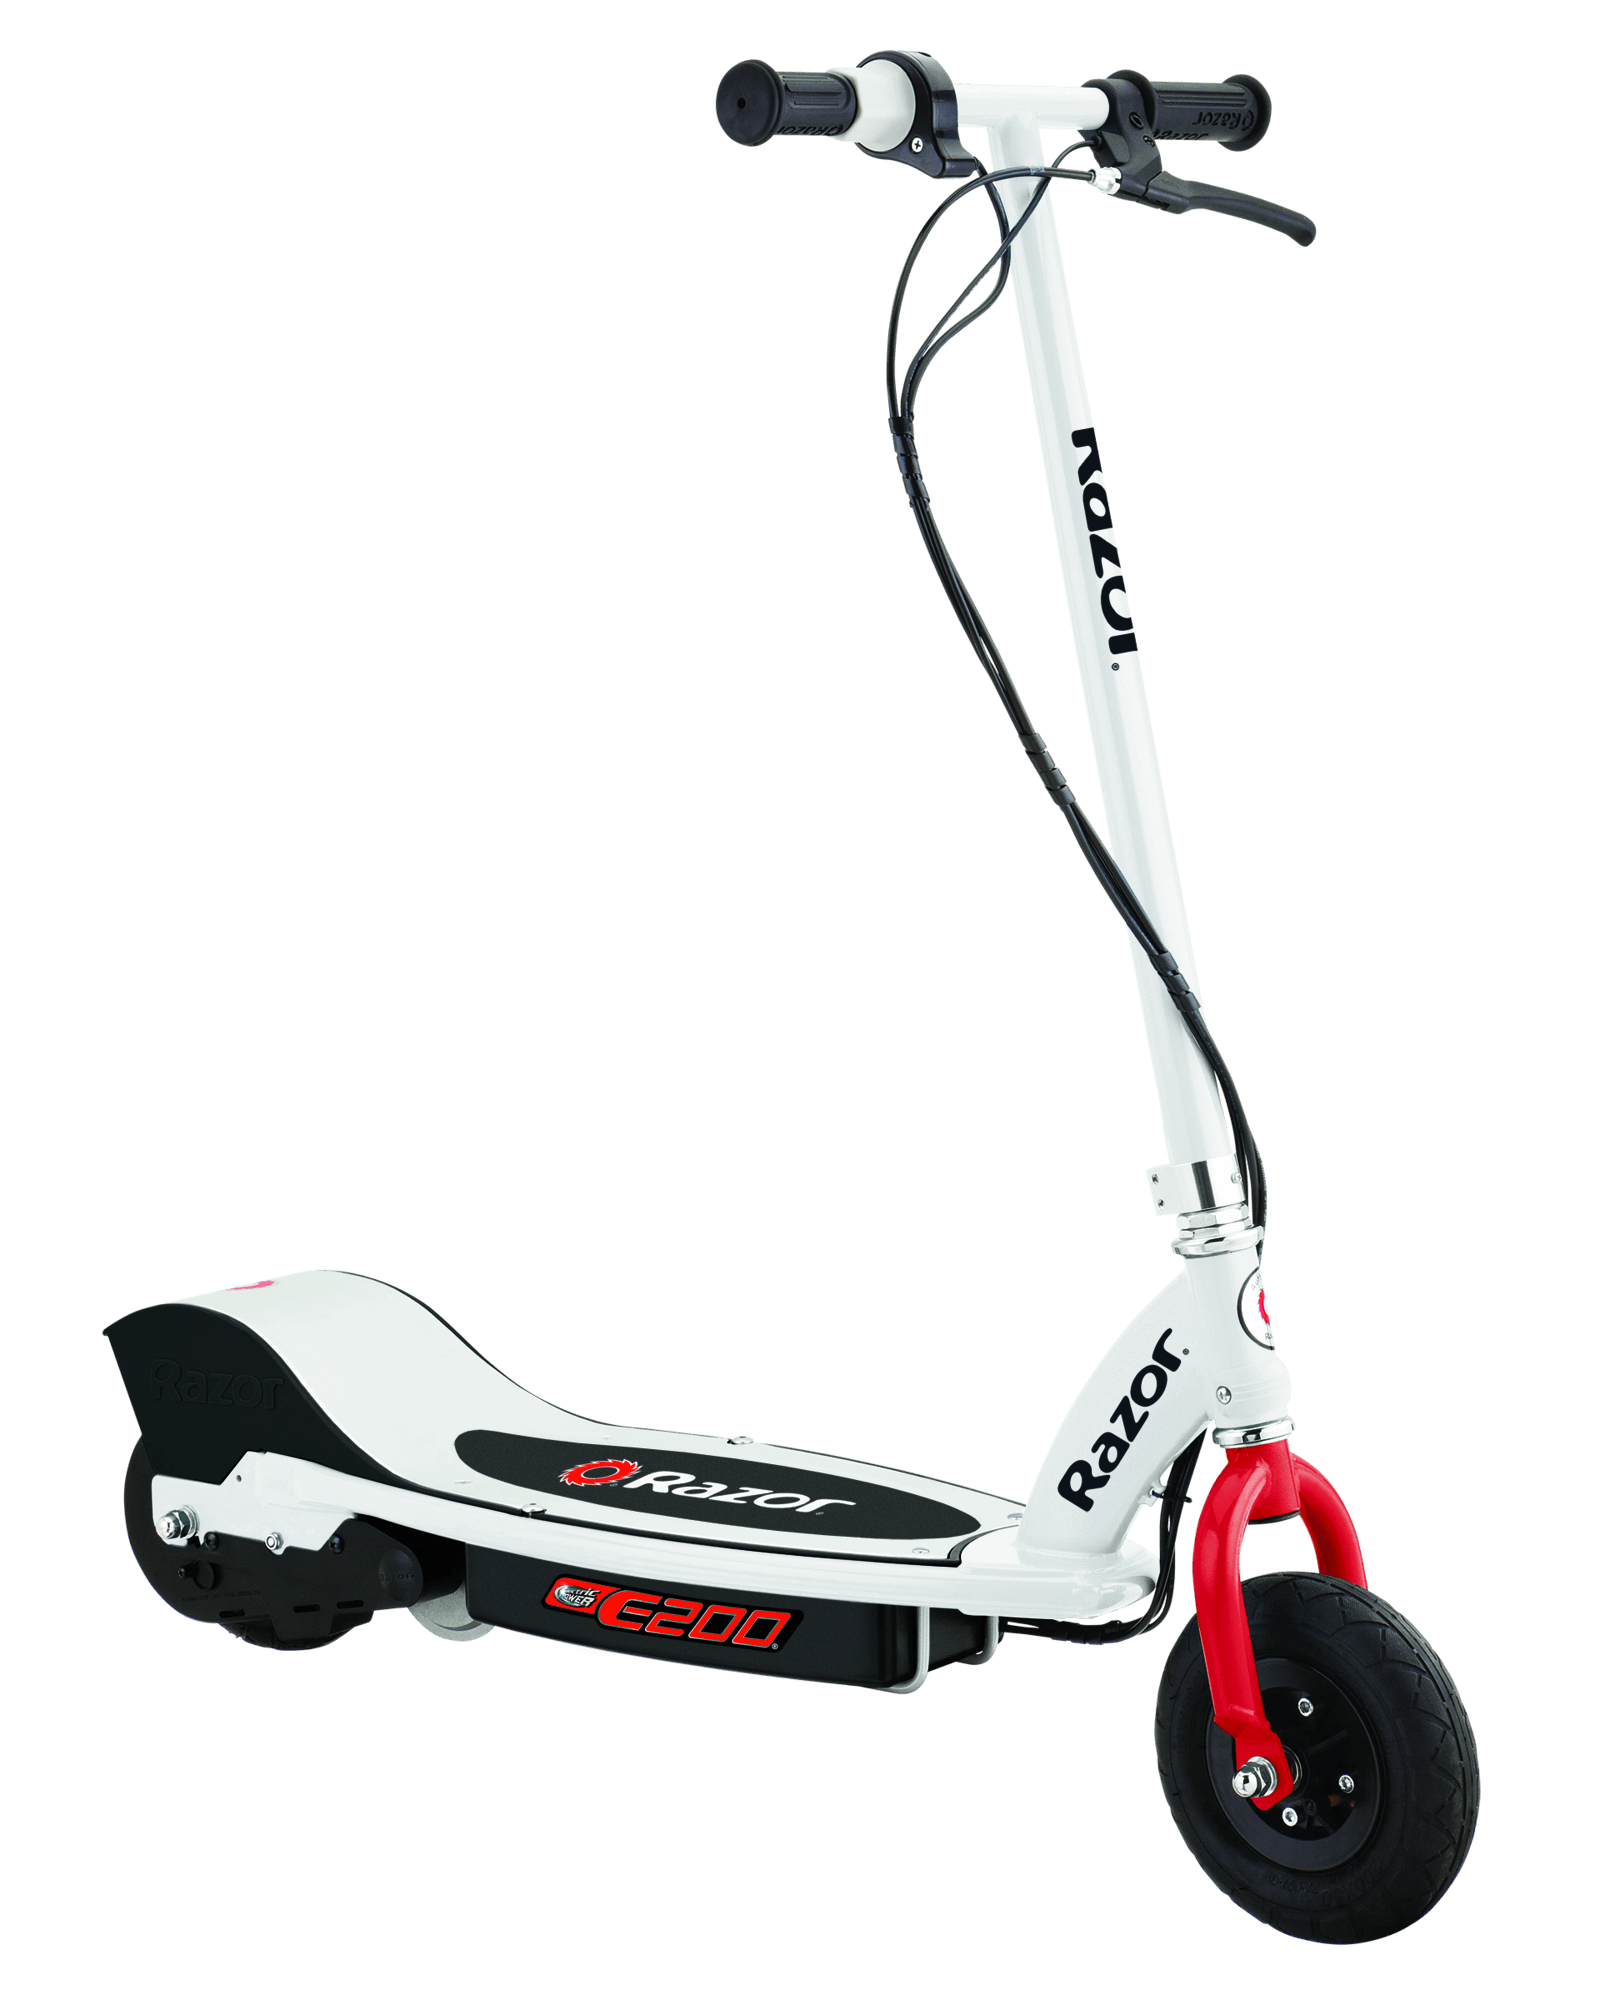 Photo 1 of FOR PARTS ONLY! Razor - E200 Electric Scooter- 8" Air-Filled Tires, 200-Watt Motor, Up to 12 mph and 40 min of Ride Time- Motor does not start. After full charge and getting to required speed, the electric motor does not engage.